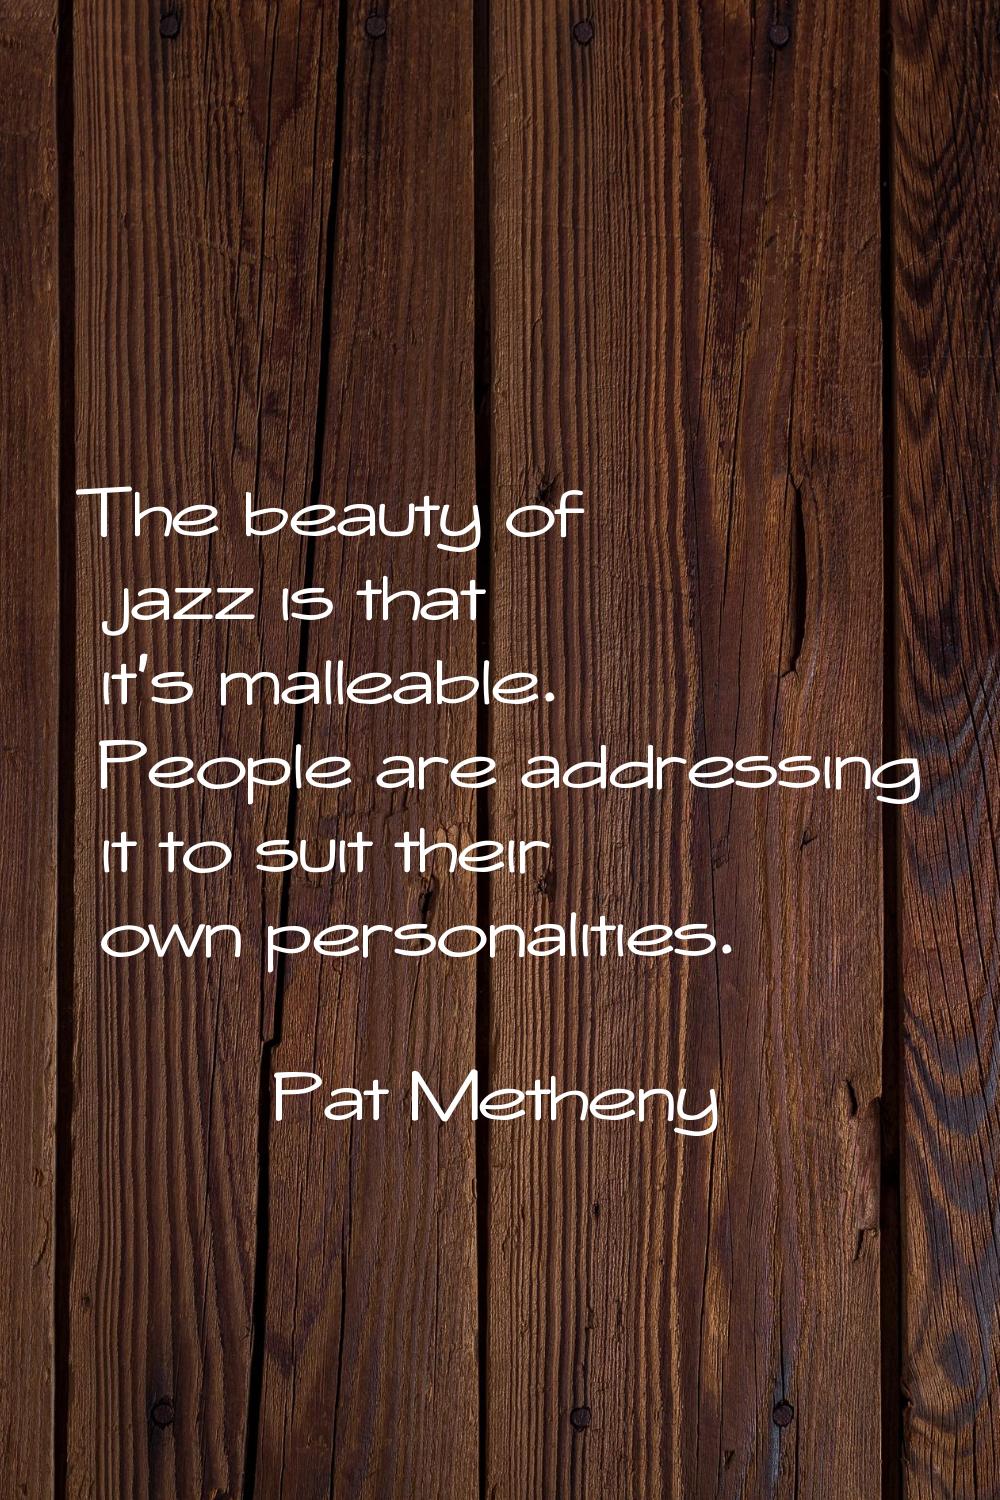 The beauty of jazz is that it's malleable. People are addressing it to suit their own personalities